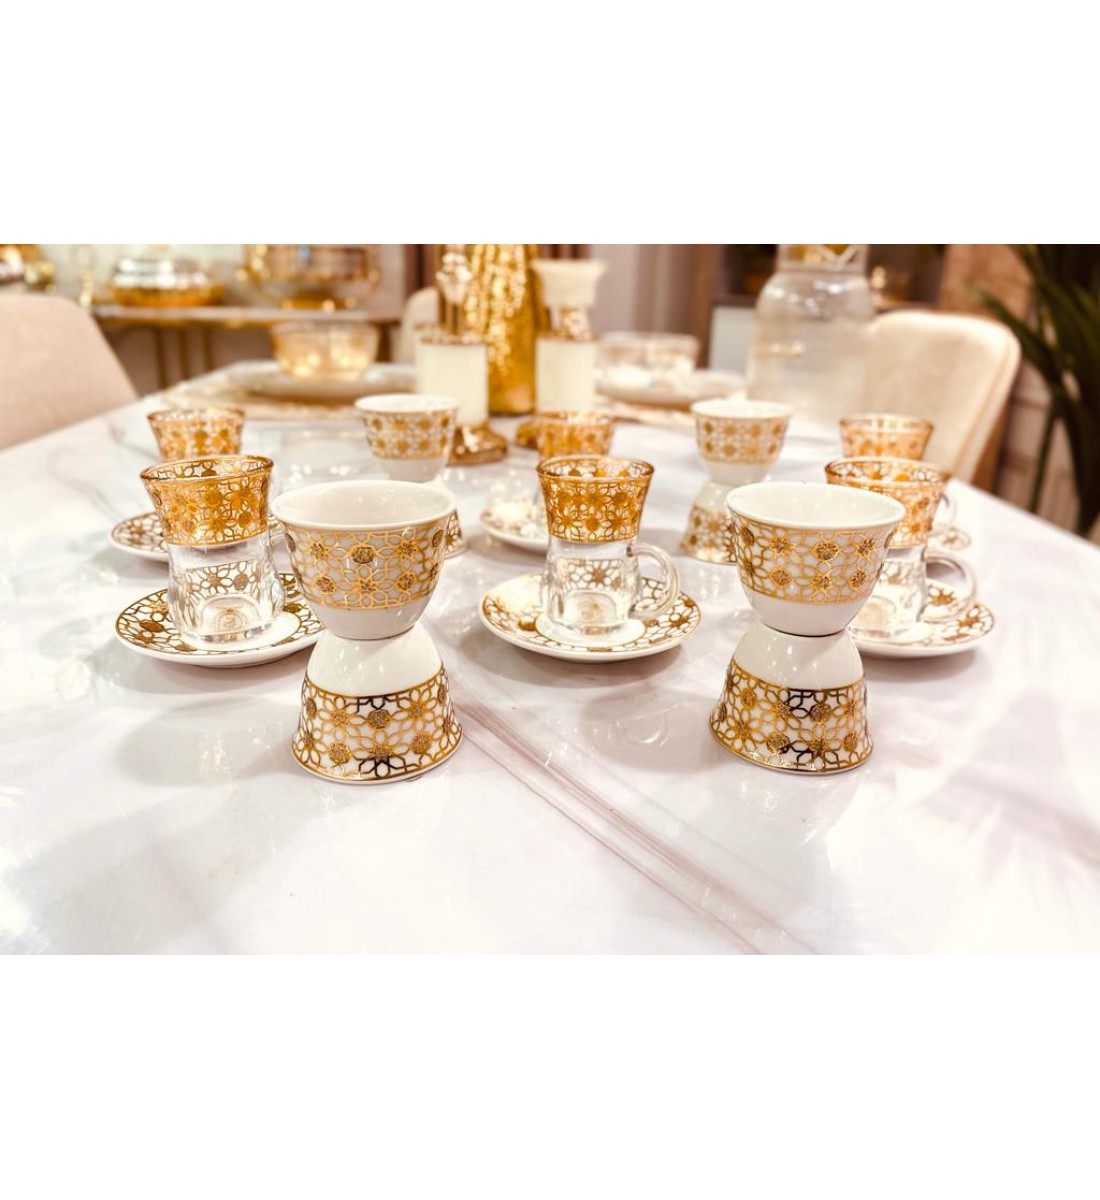 A set of 36 gilded cups and cups